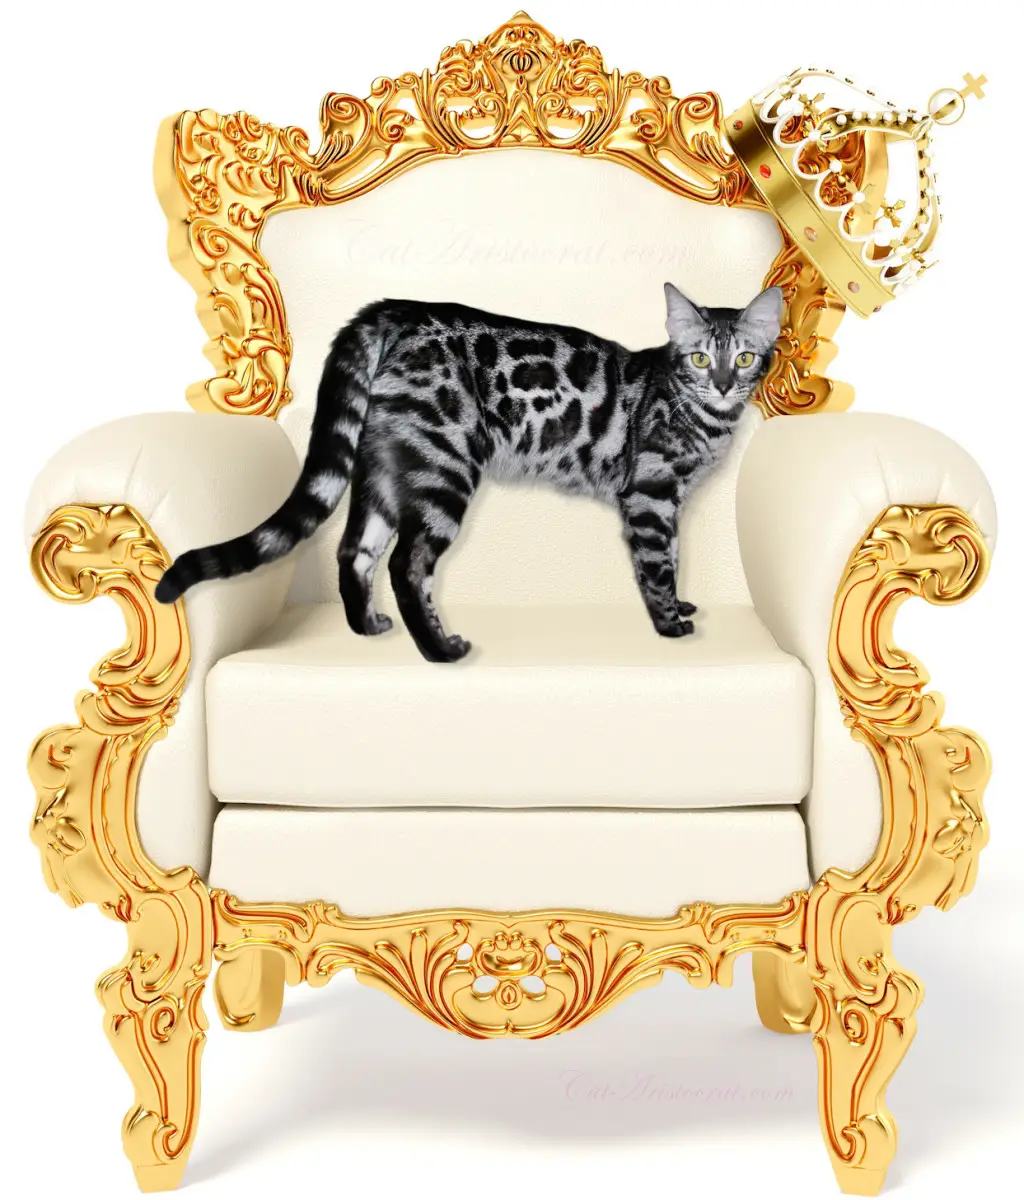 Silver Bengal cat on the throne